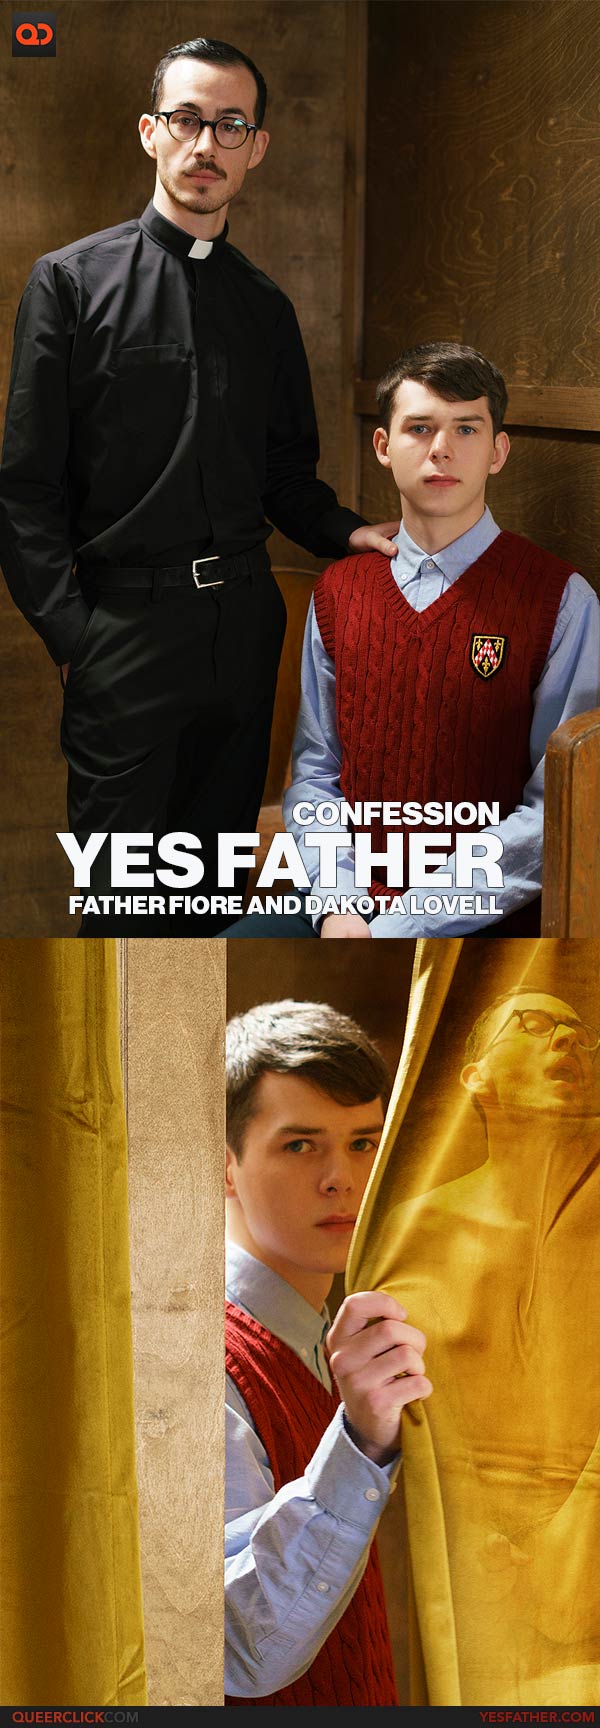 YesFather: Confession - Father Fiore and Dakota Lovell 